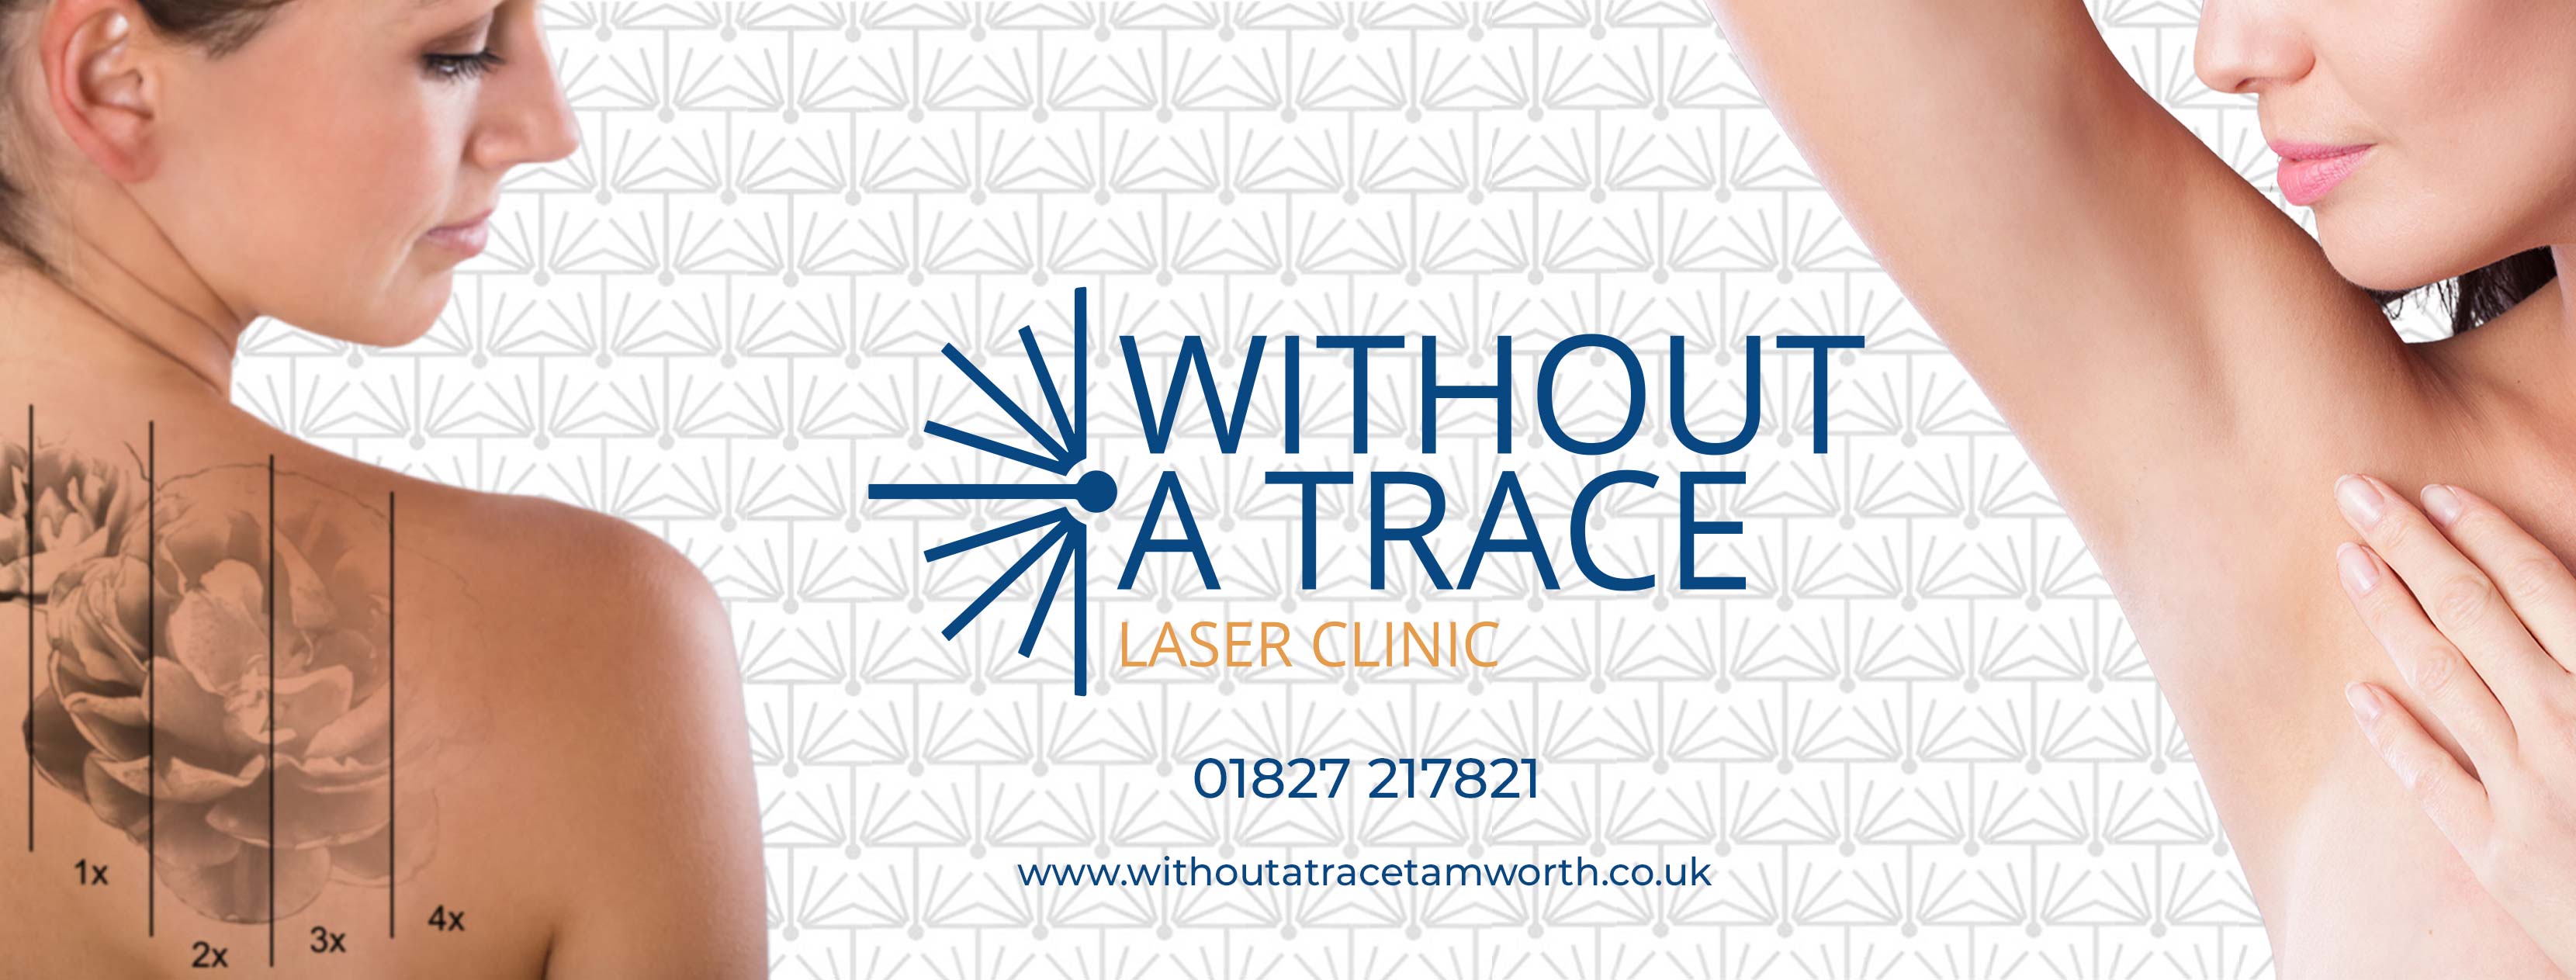 Without A Trace Laser Clinic